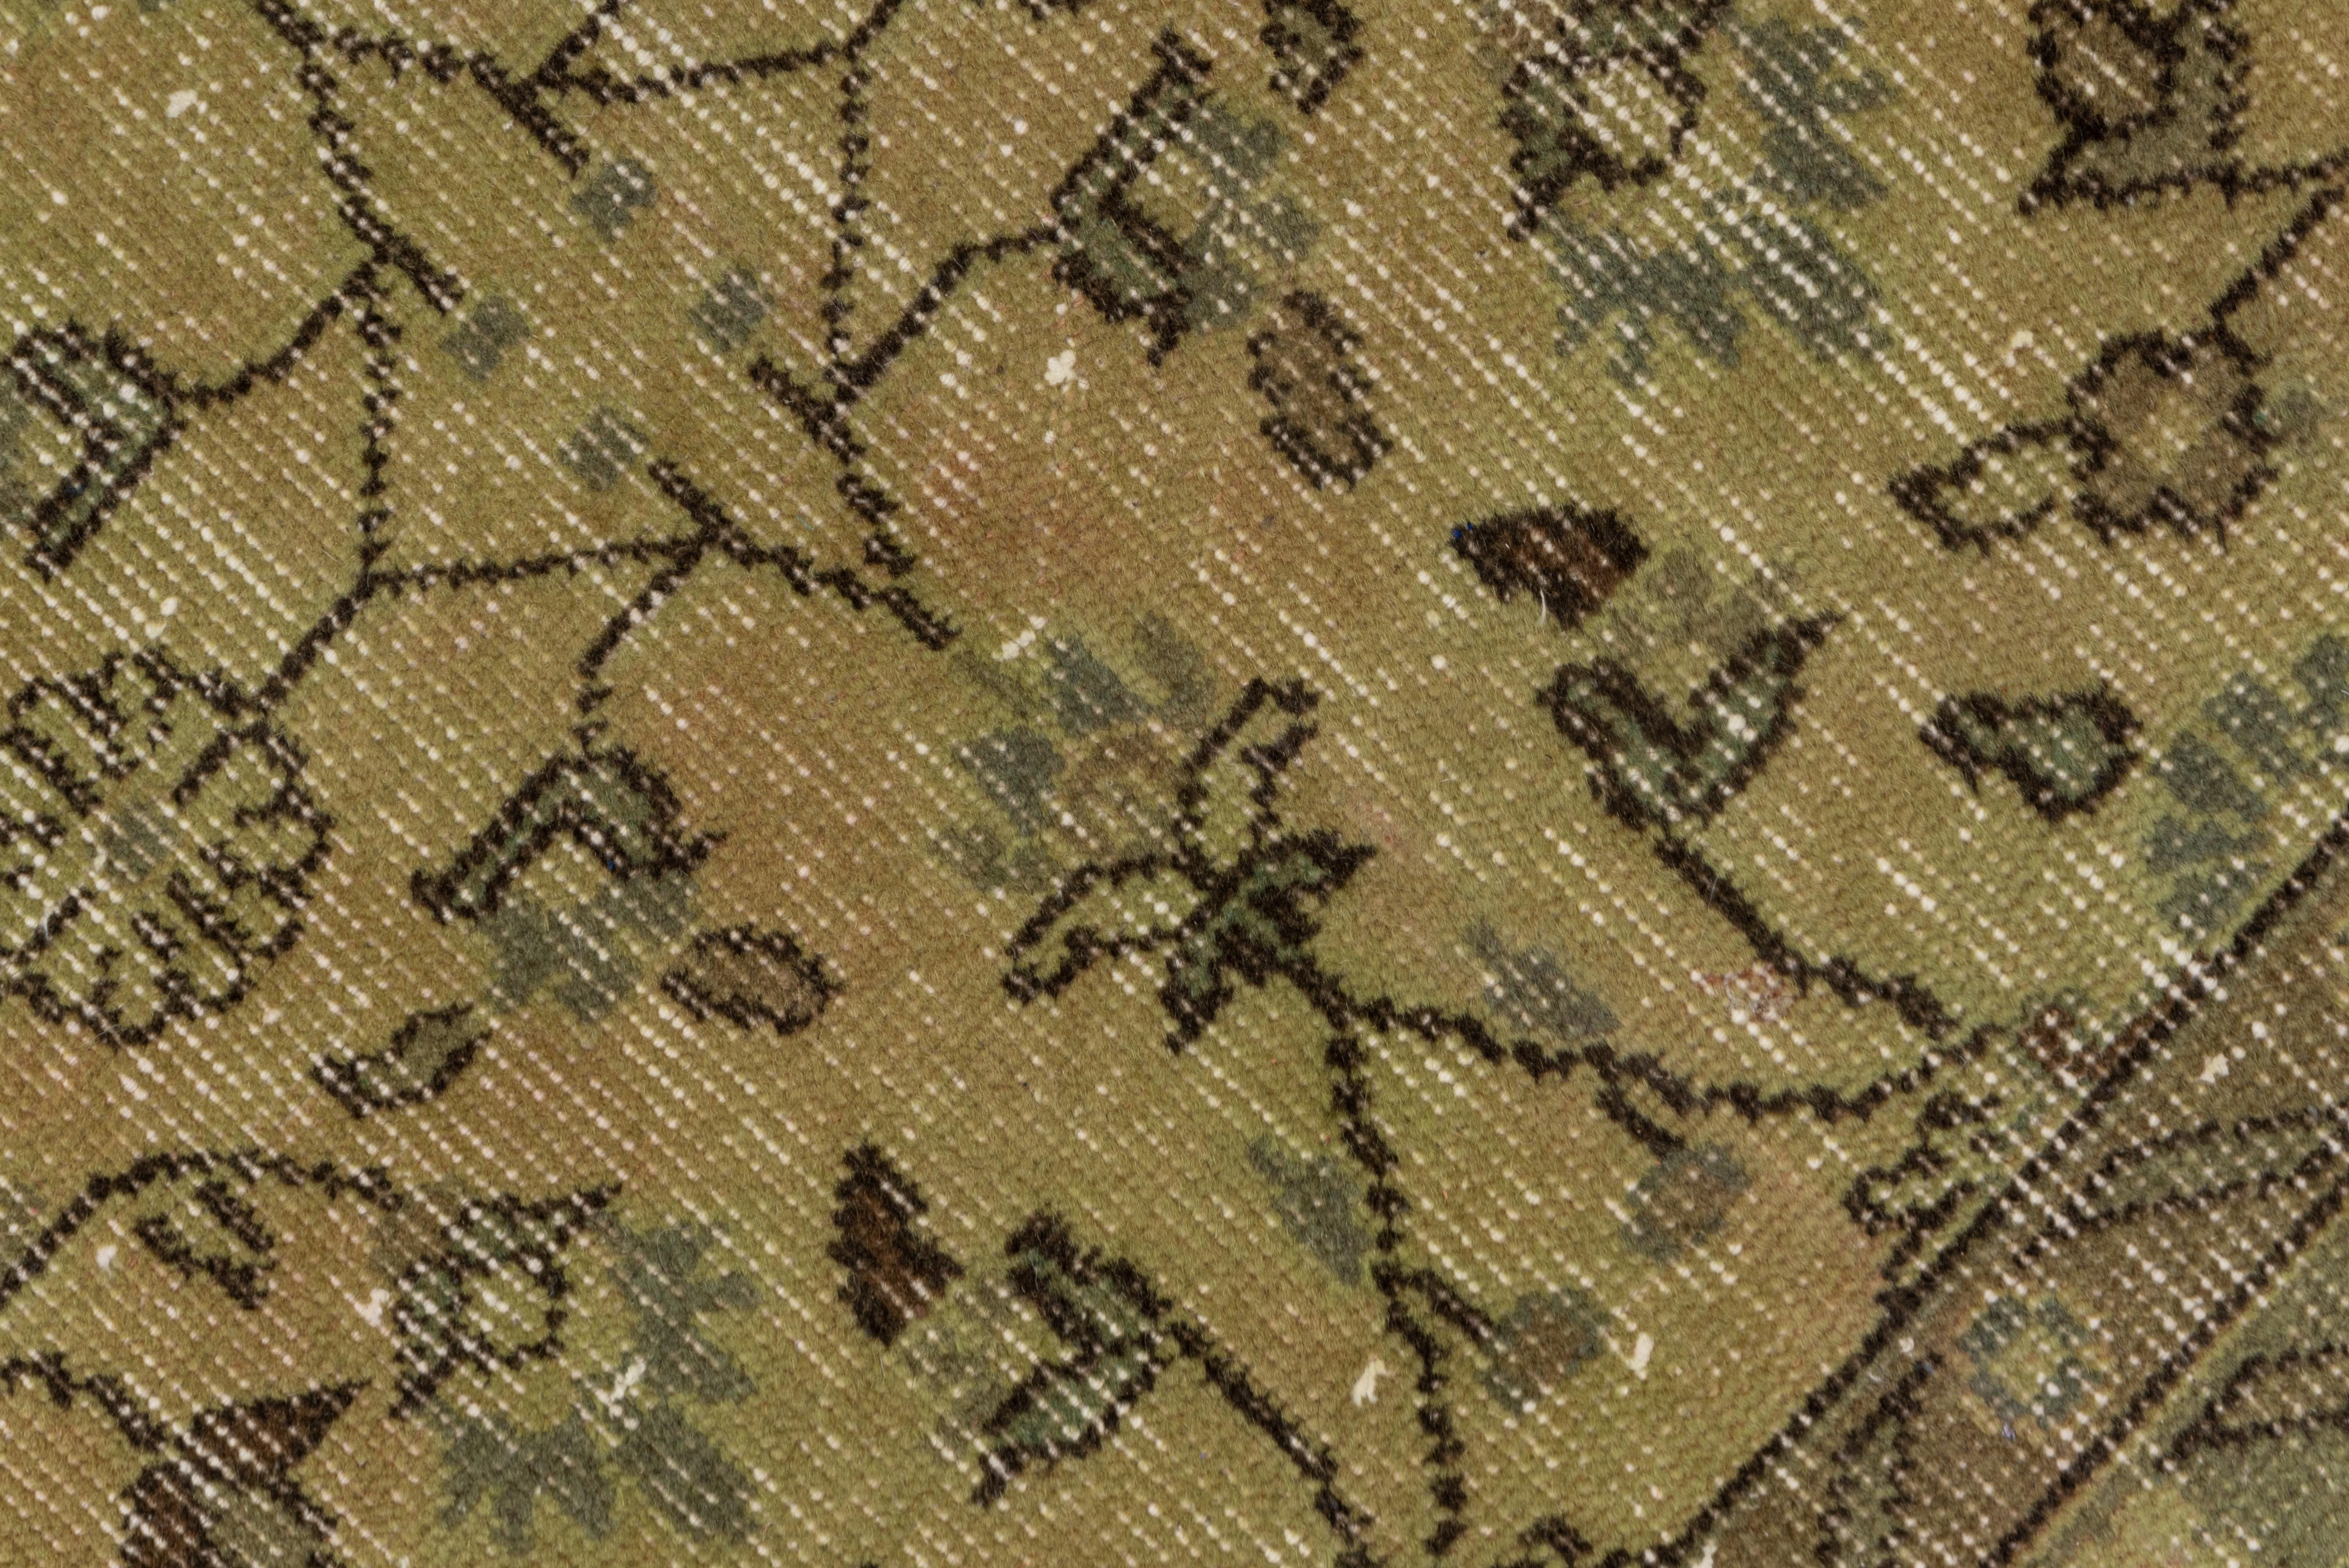 This Turkish Oushak or Sparta in worn condition was overdyed lightly to create a golden all-over tone. The field displays a wiry, repeating pattern of thin stems, rosettes and small blossoms.